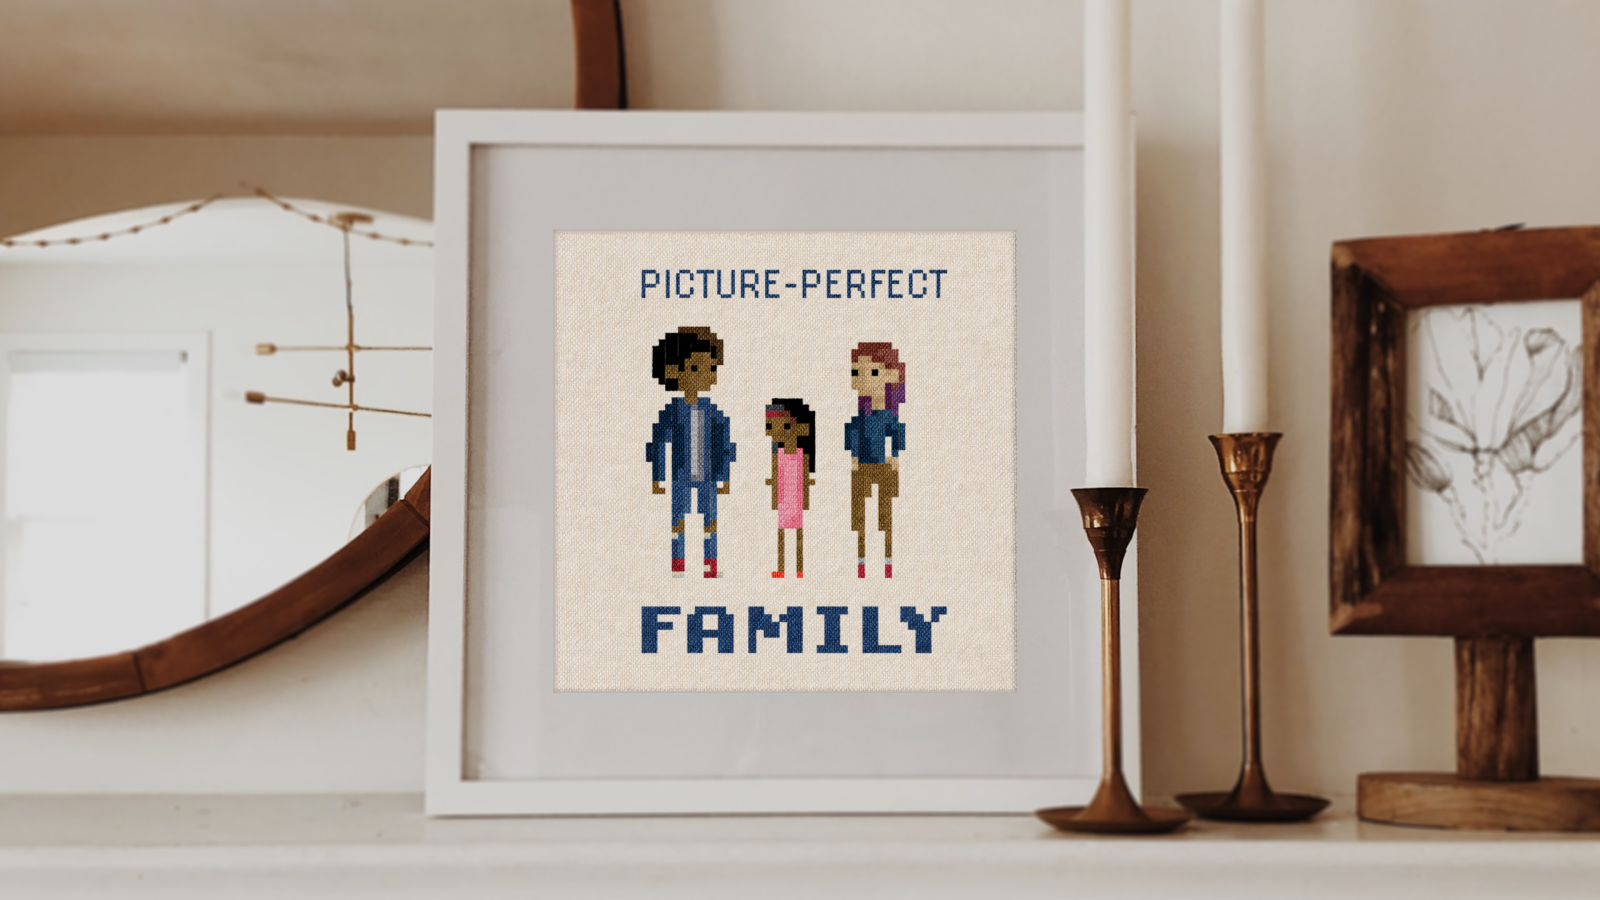 Picture Perfect Family